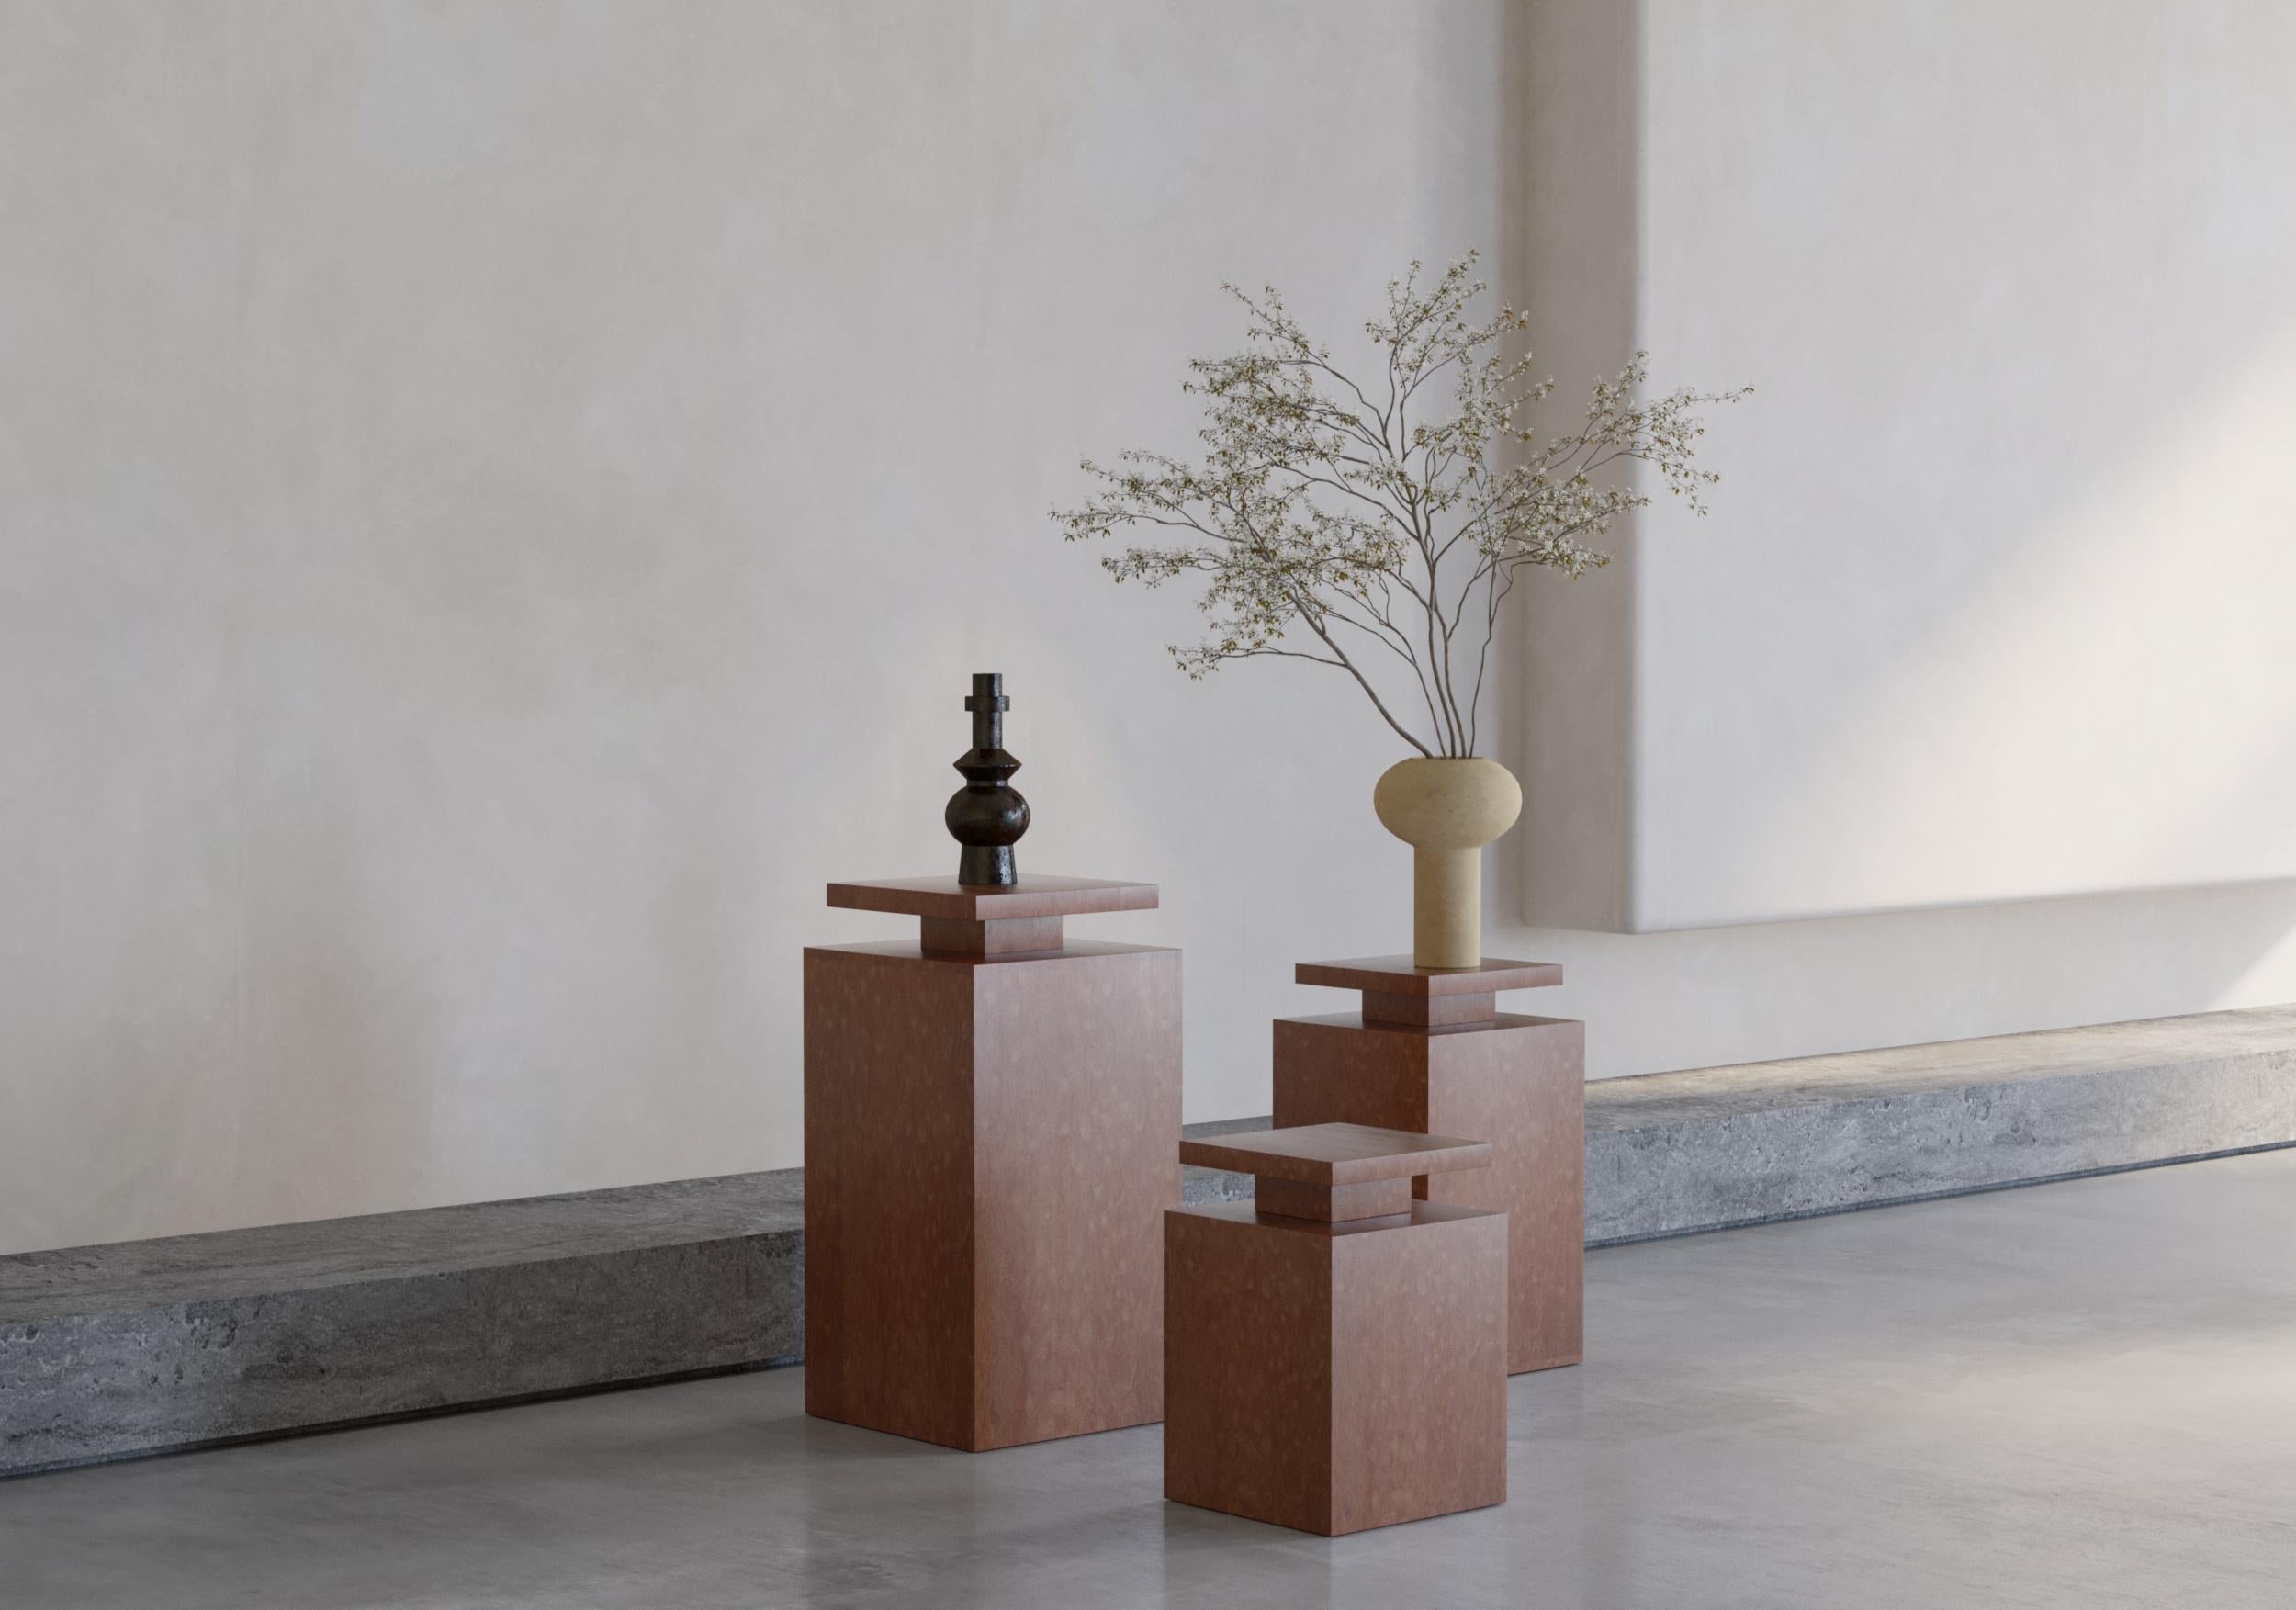 Asos pedestals are ideal for displaying your special sculptures and objects, flower arrangements and even more. It makes it possible to create an effective display area by using several different sizes together.